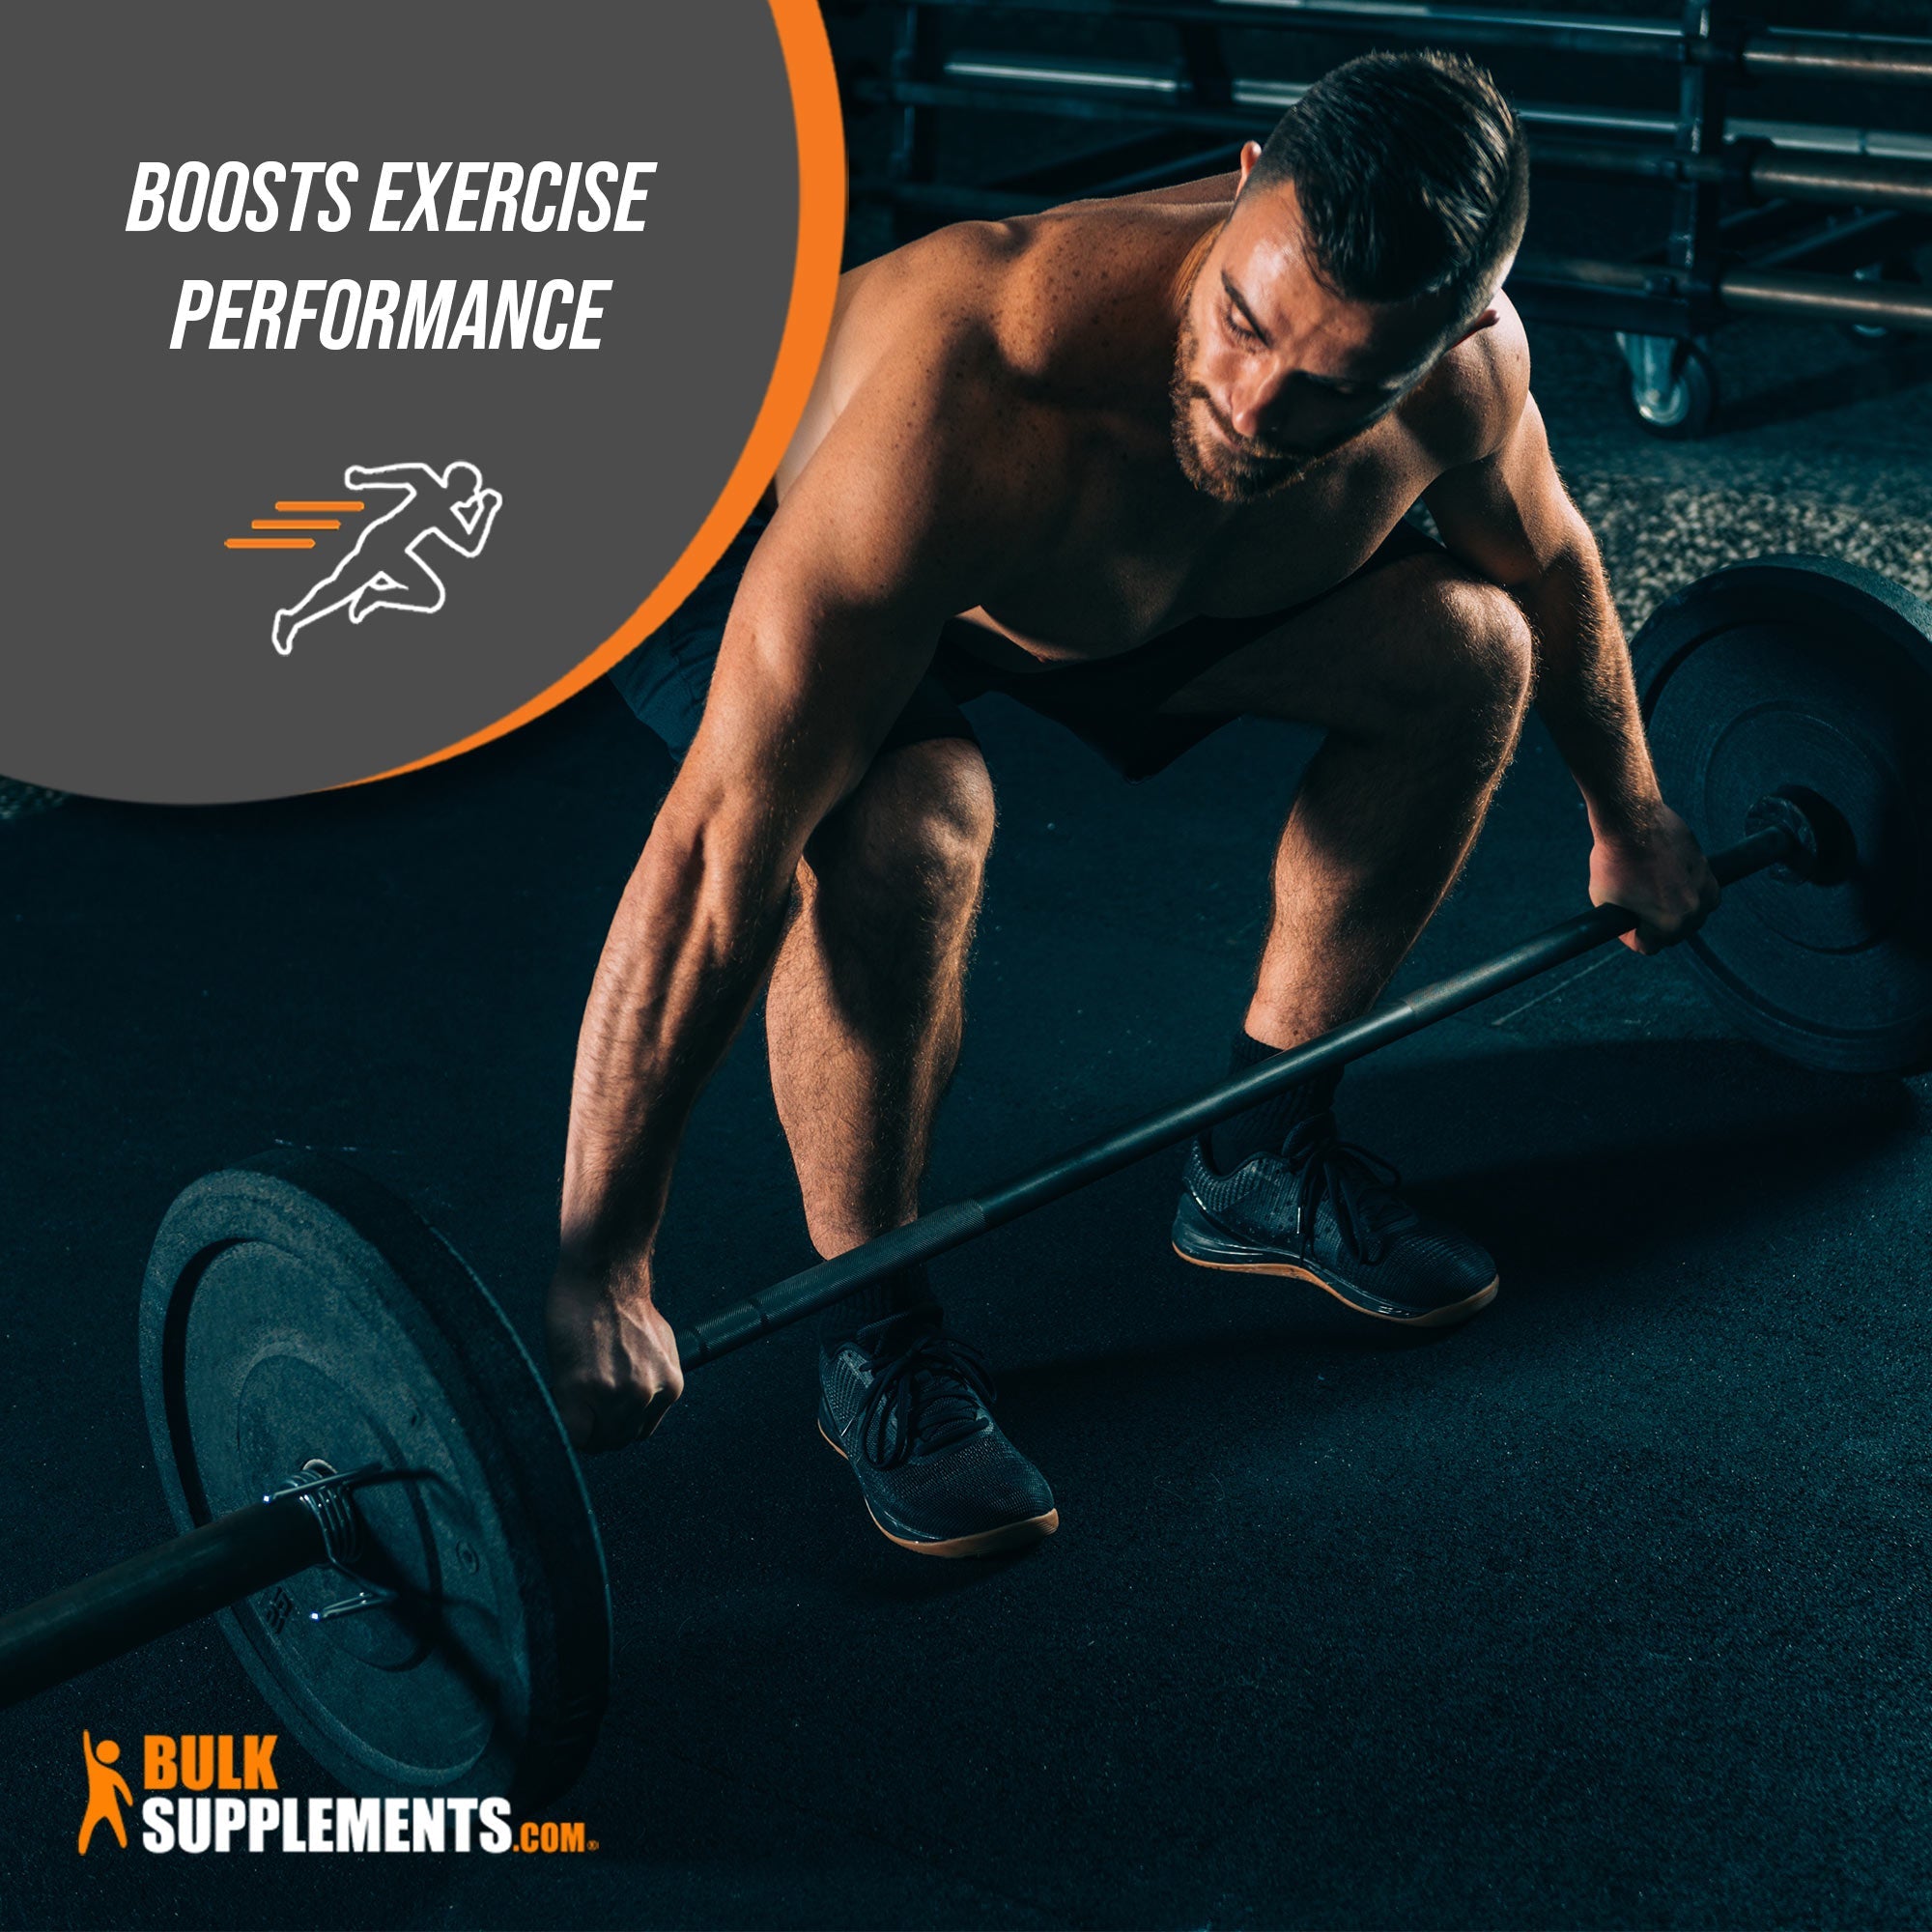 L-Carnitine Exercise Performance Benefit